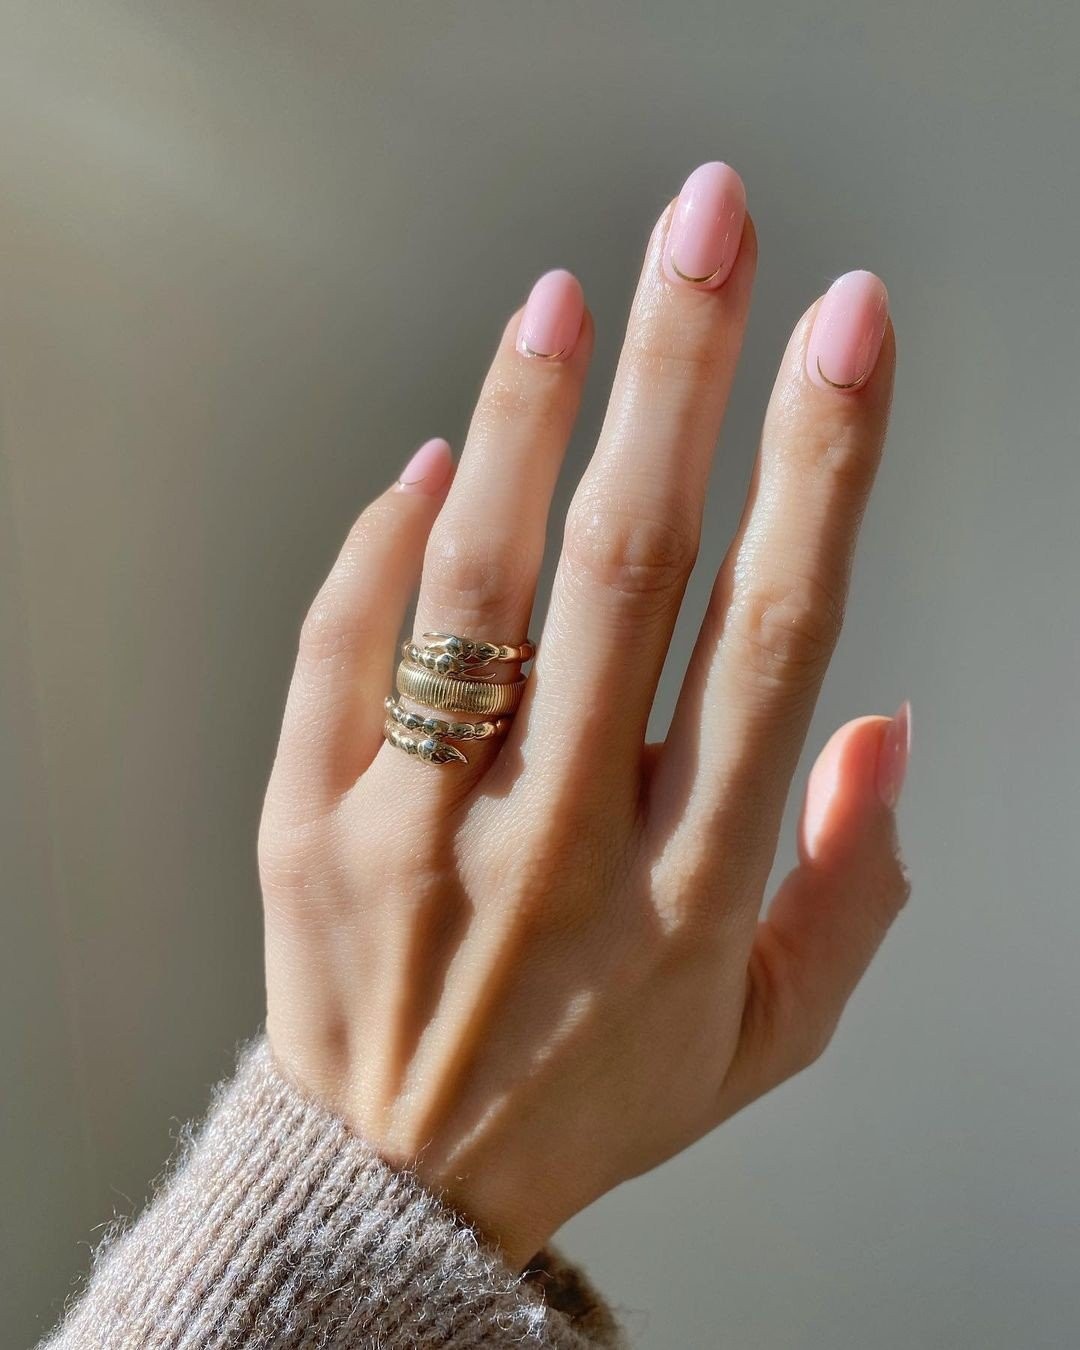 nude-nails-UiSGn.jpg